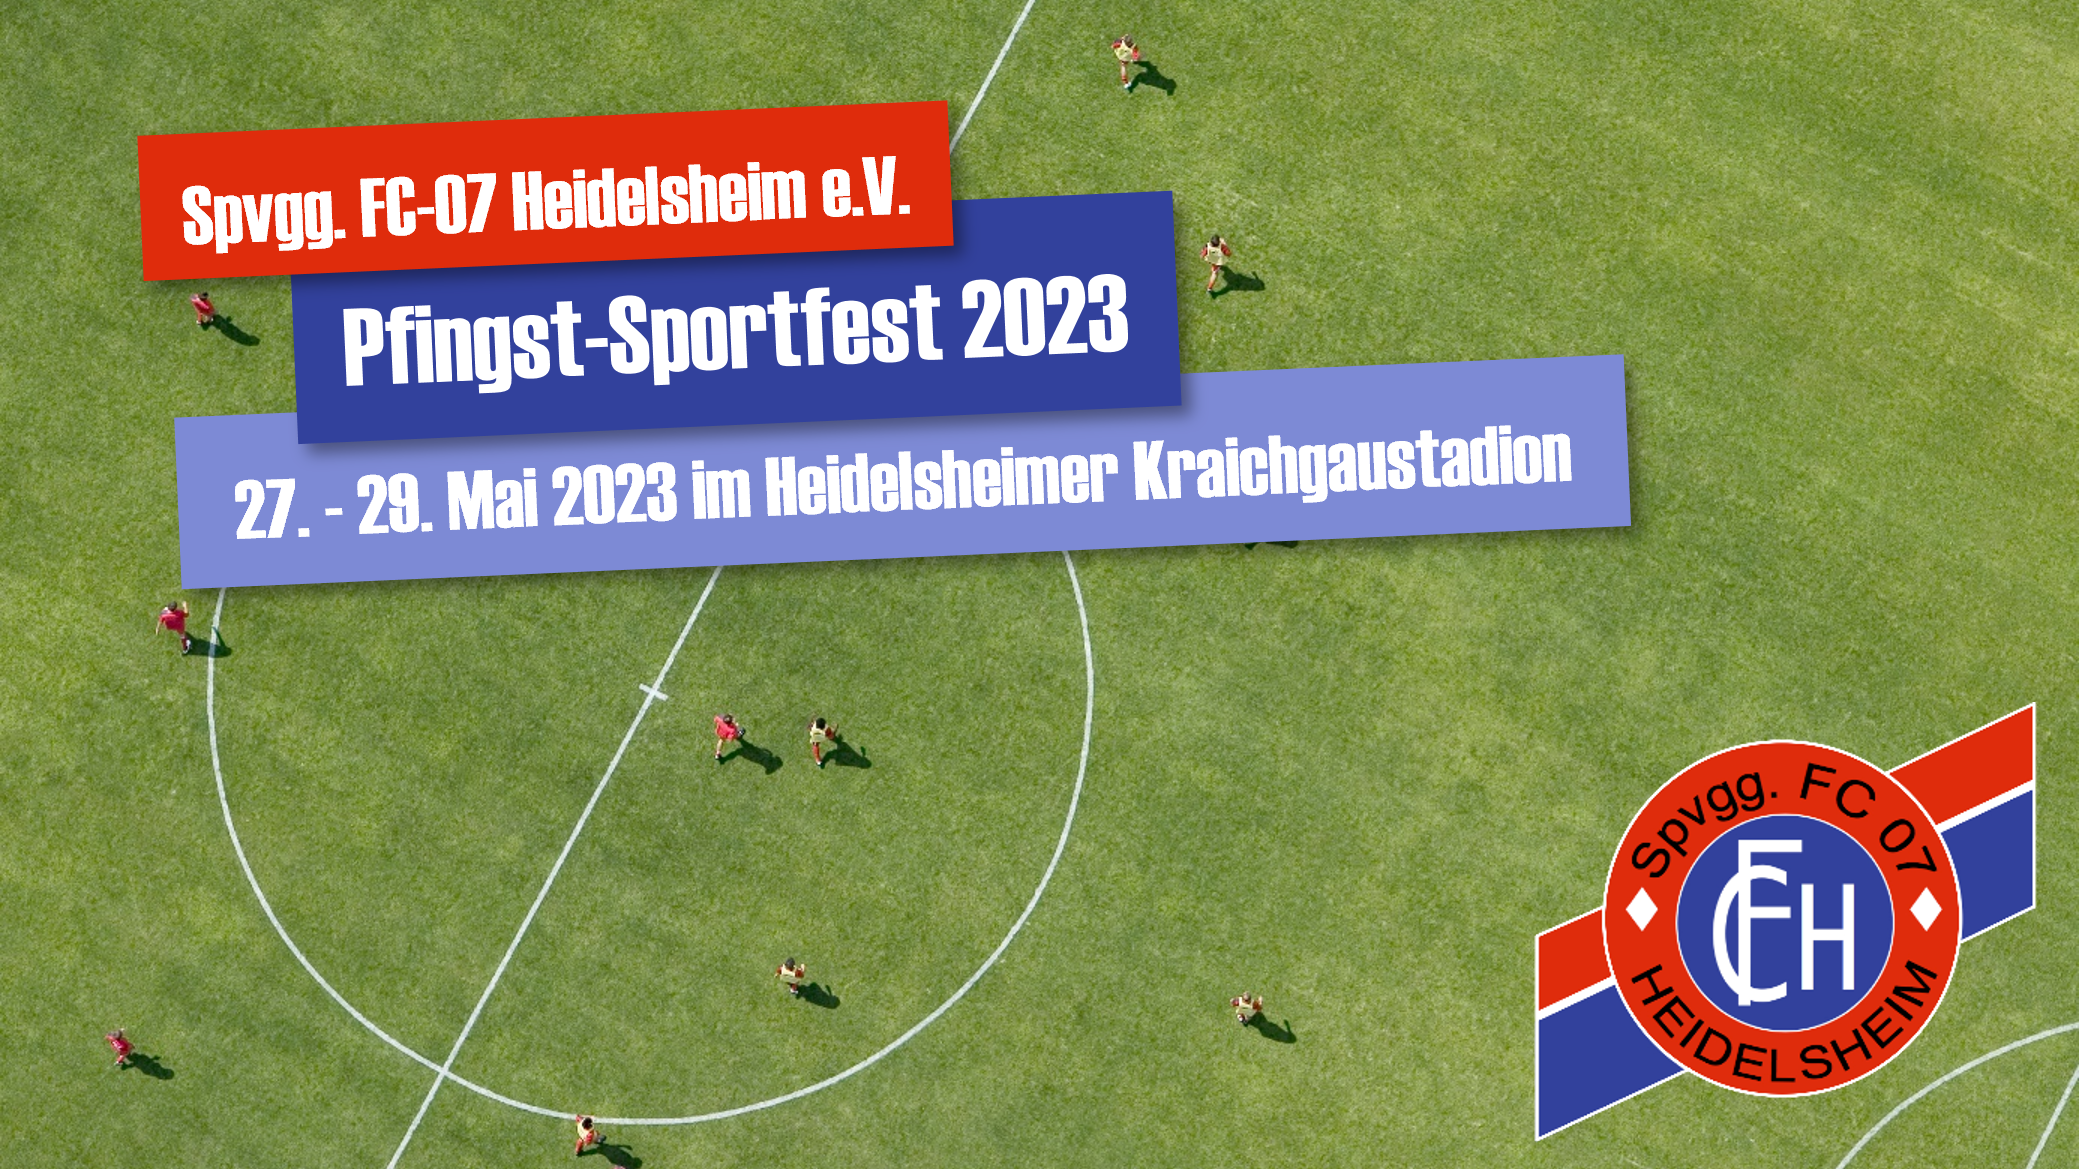 You are currently viewing Pfingst-Sportfest 2023 des FC-07 Heidelsheim vom 27. – 29. Mai 2023!